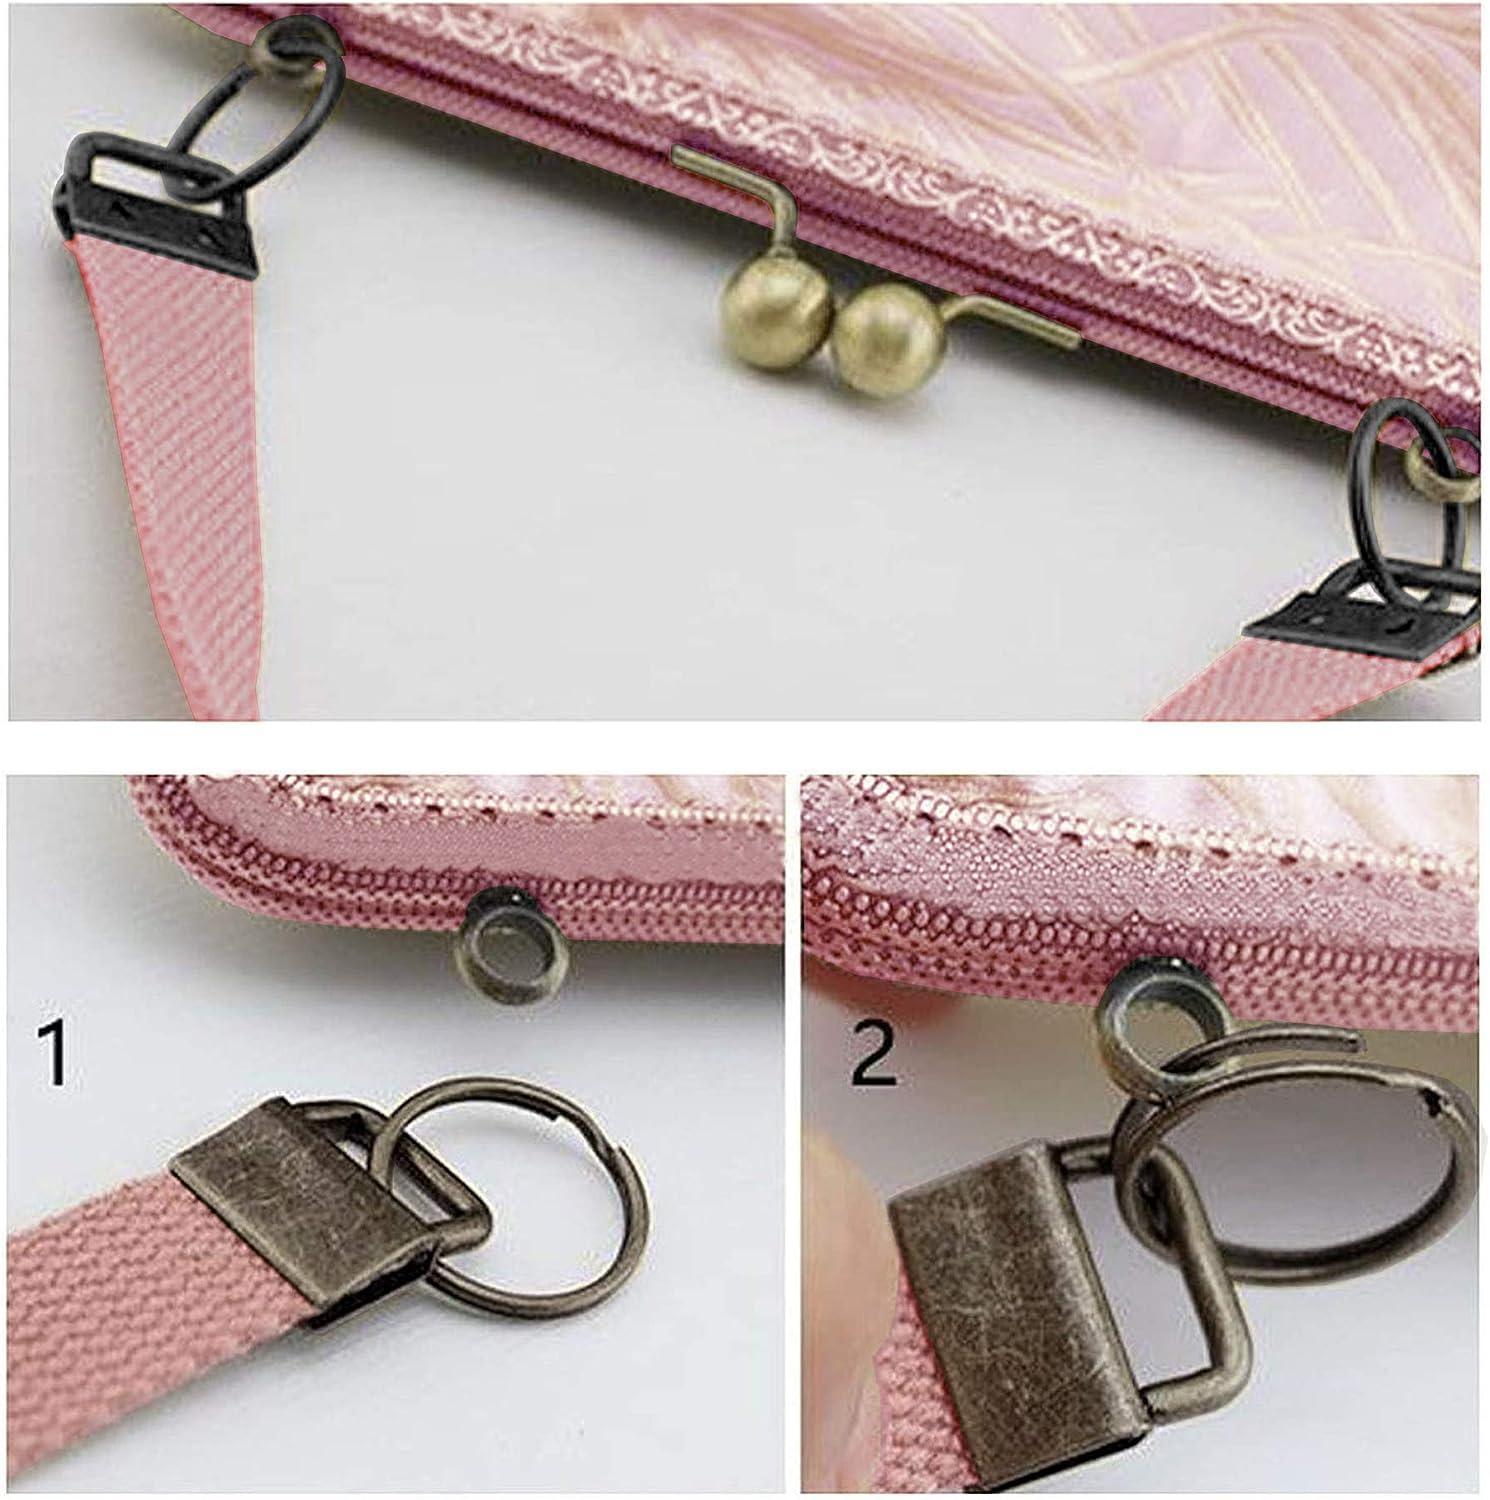 1 Inch Key Fob Hardware With Key Rings Set For Bag Wristlets